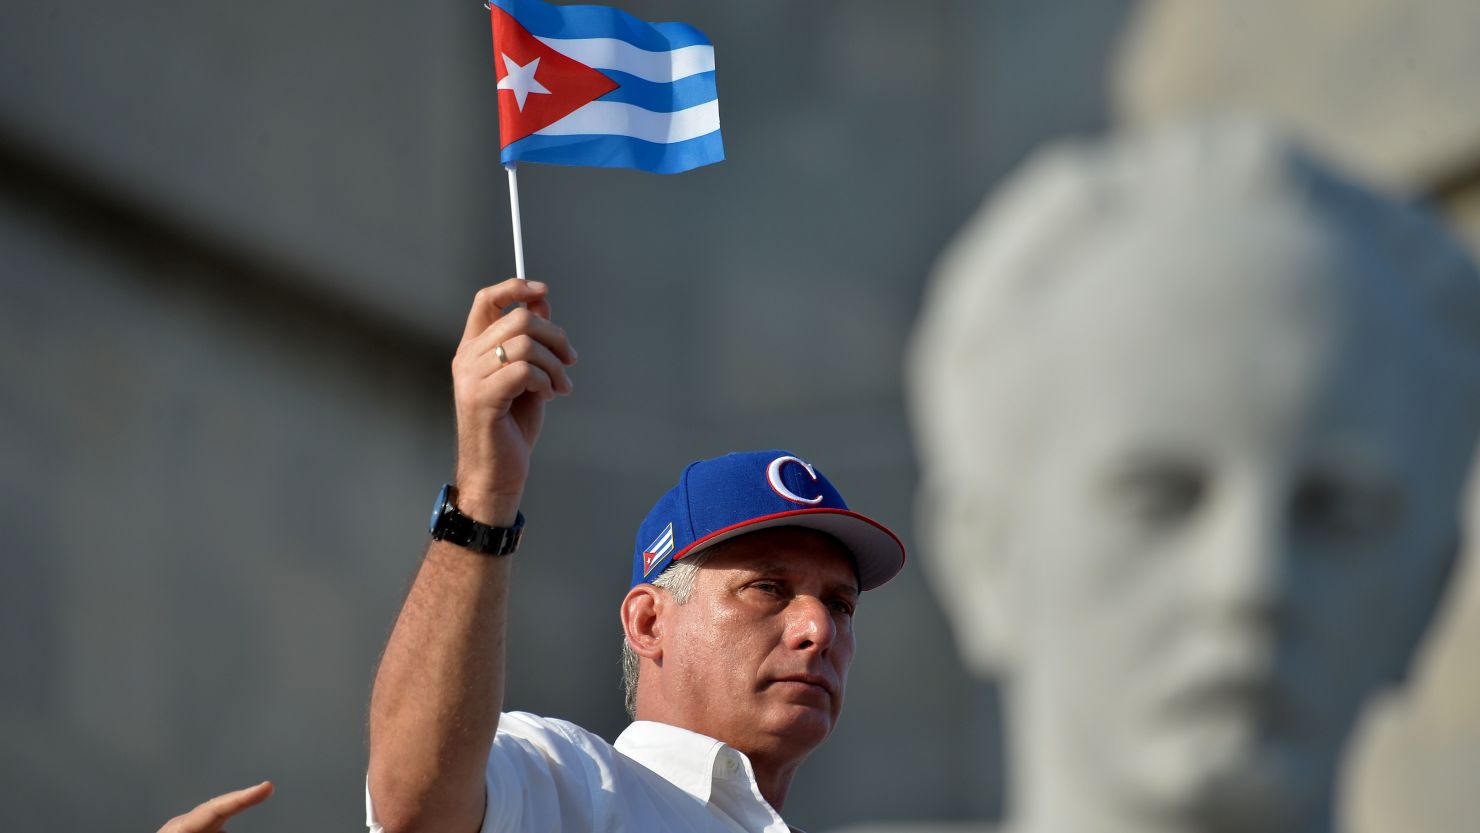 Cuban President Miguel Diaz-Canel waves a national flag during the May Day rally at Revolution Square in Havana.